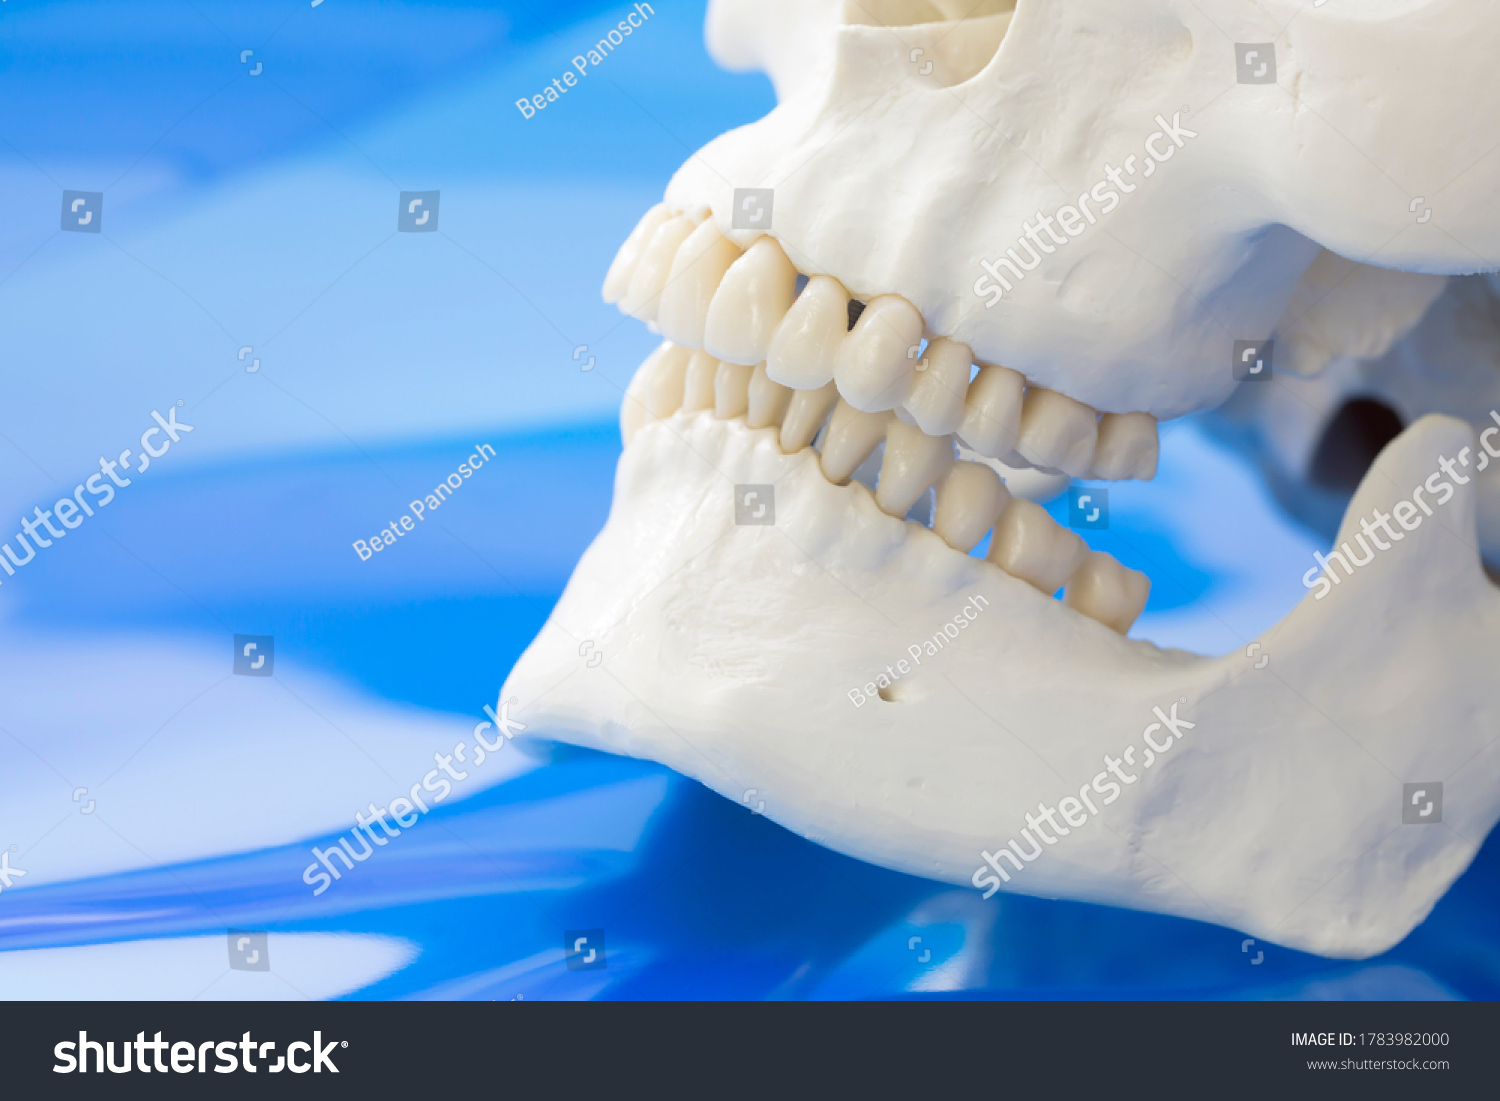 Model of retrognathism. Jawbones with maxillary and mandibular dentition and lower jaw set further back than upper jaw on blue background #1783982000